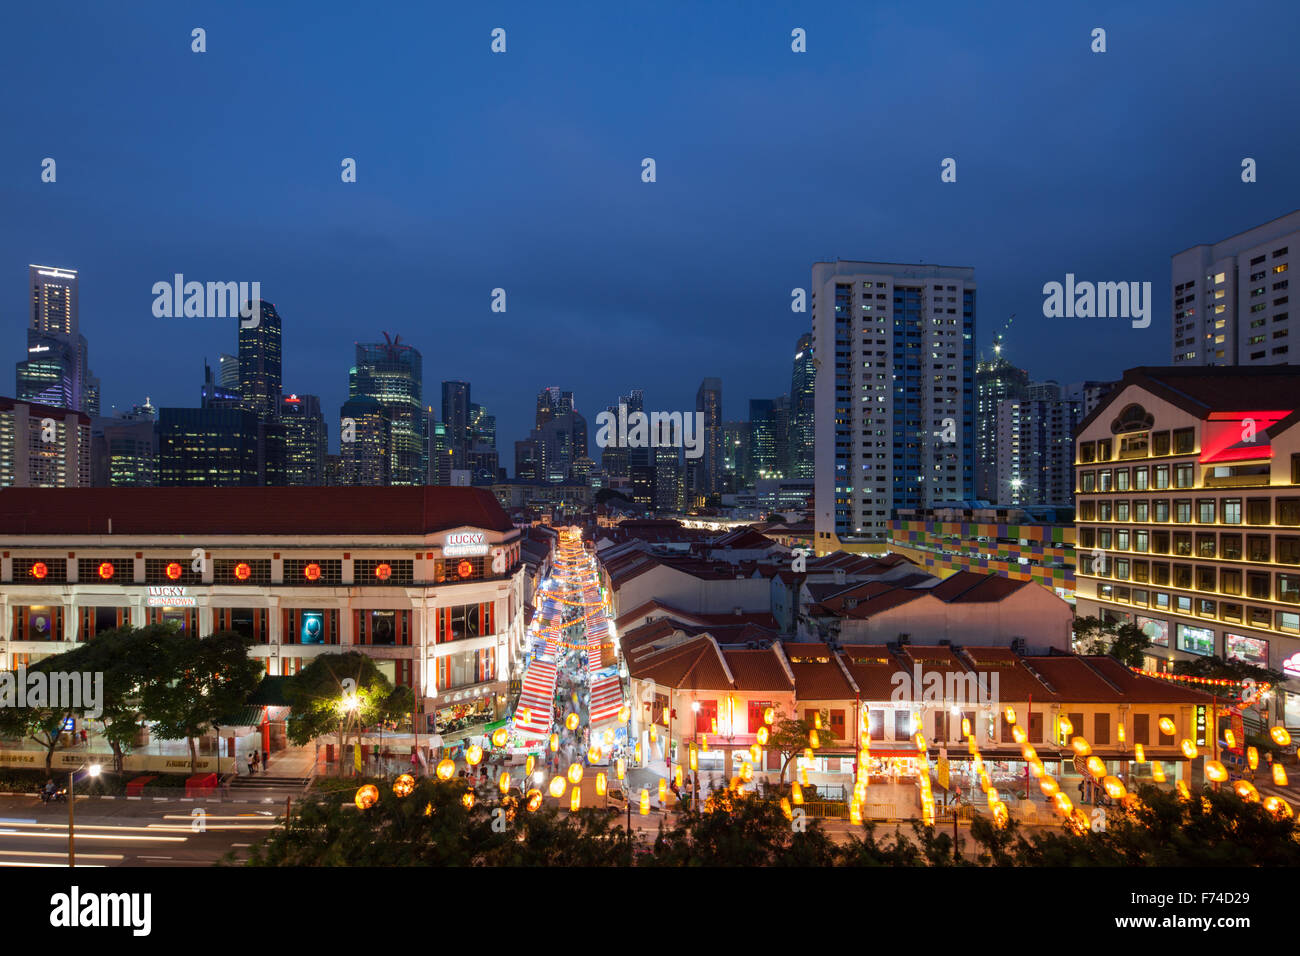 February 2015. Chinatown association will host Chinese New Year  night market event annually. Singapore. Stock Photo